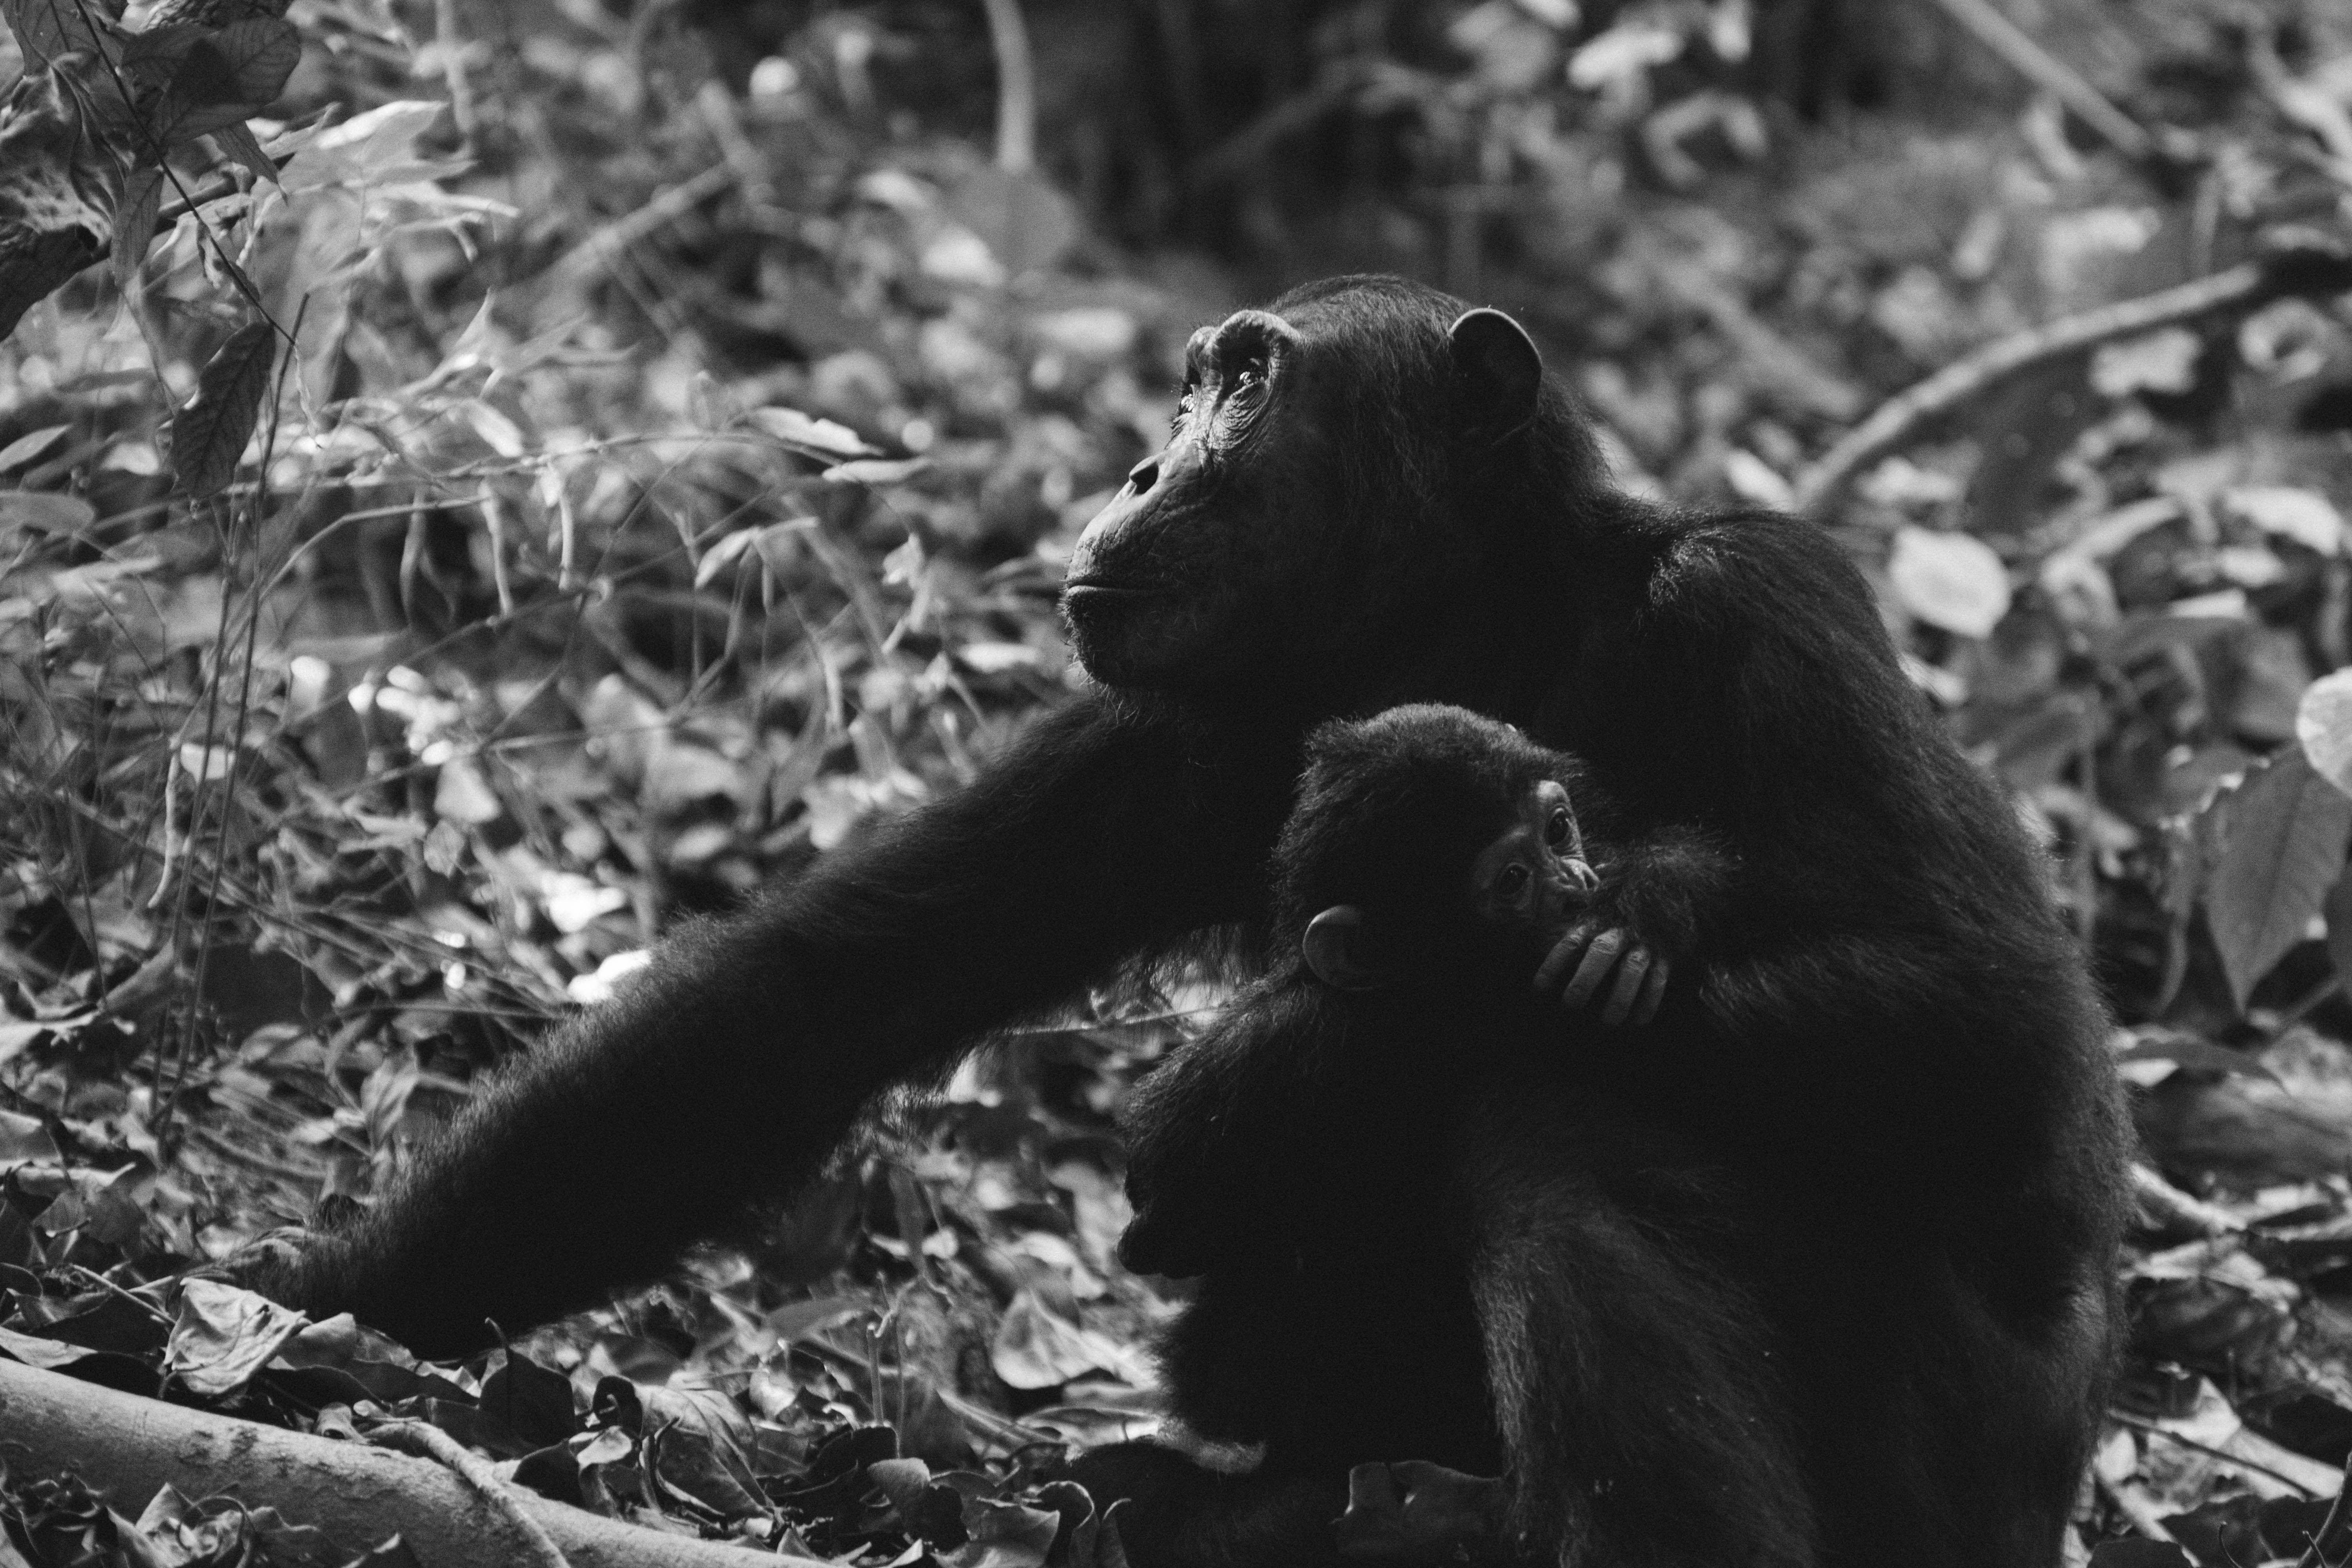 grayscale photography of primate mother and baby